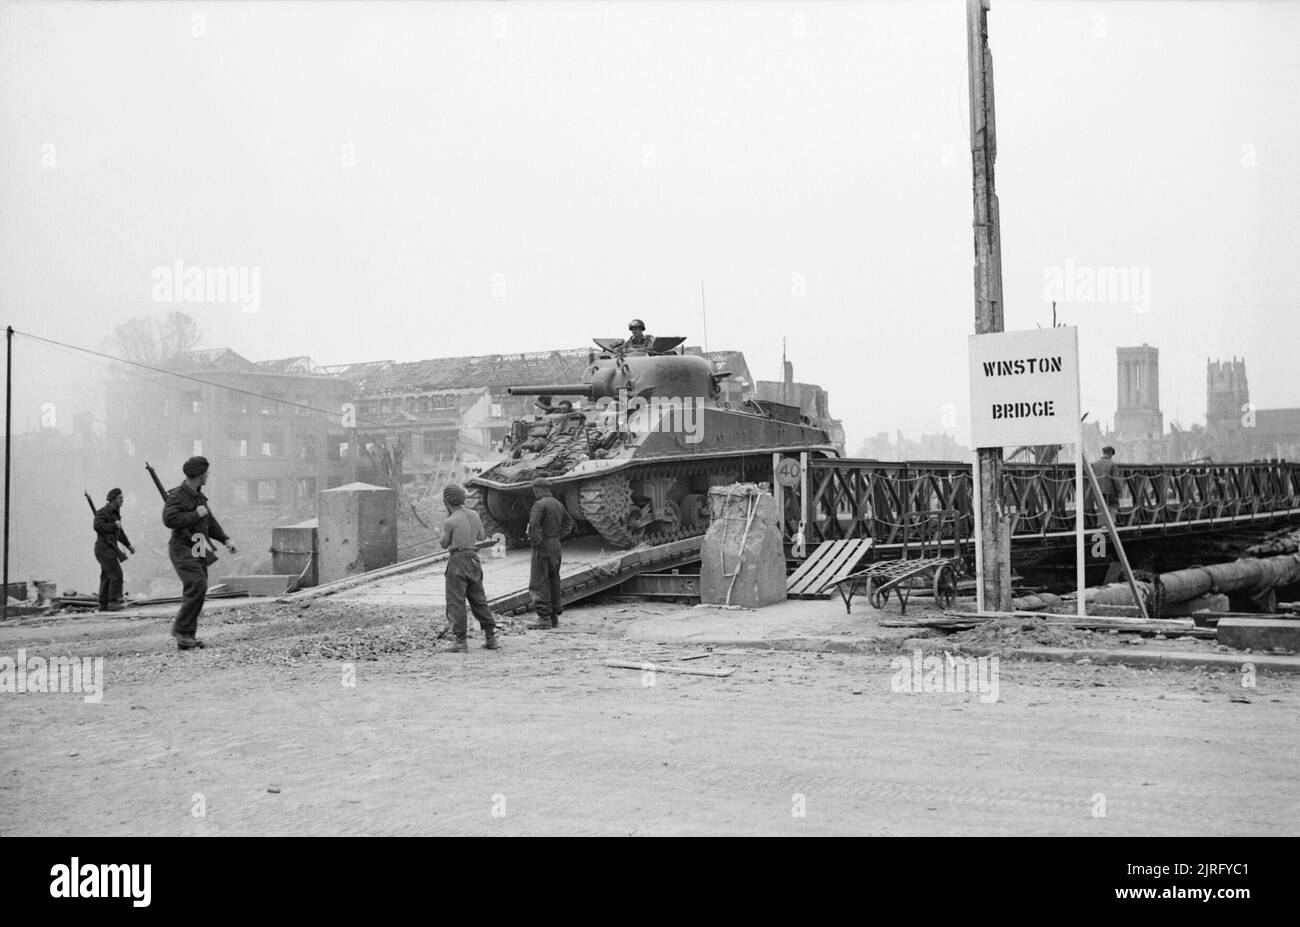 The British Army in the Normandy Campaign 1944 A Sherman tank crosses 'Winston Bridge', a Bailey bridge built over the River Orne for the 'Goodwood' offensive, 24 July 1944 Stock Photo